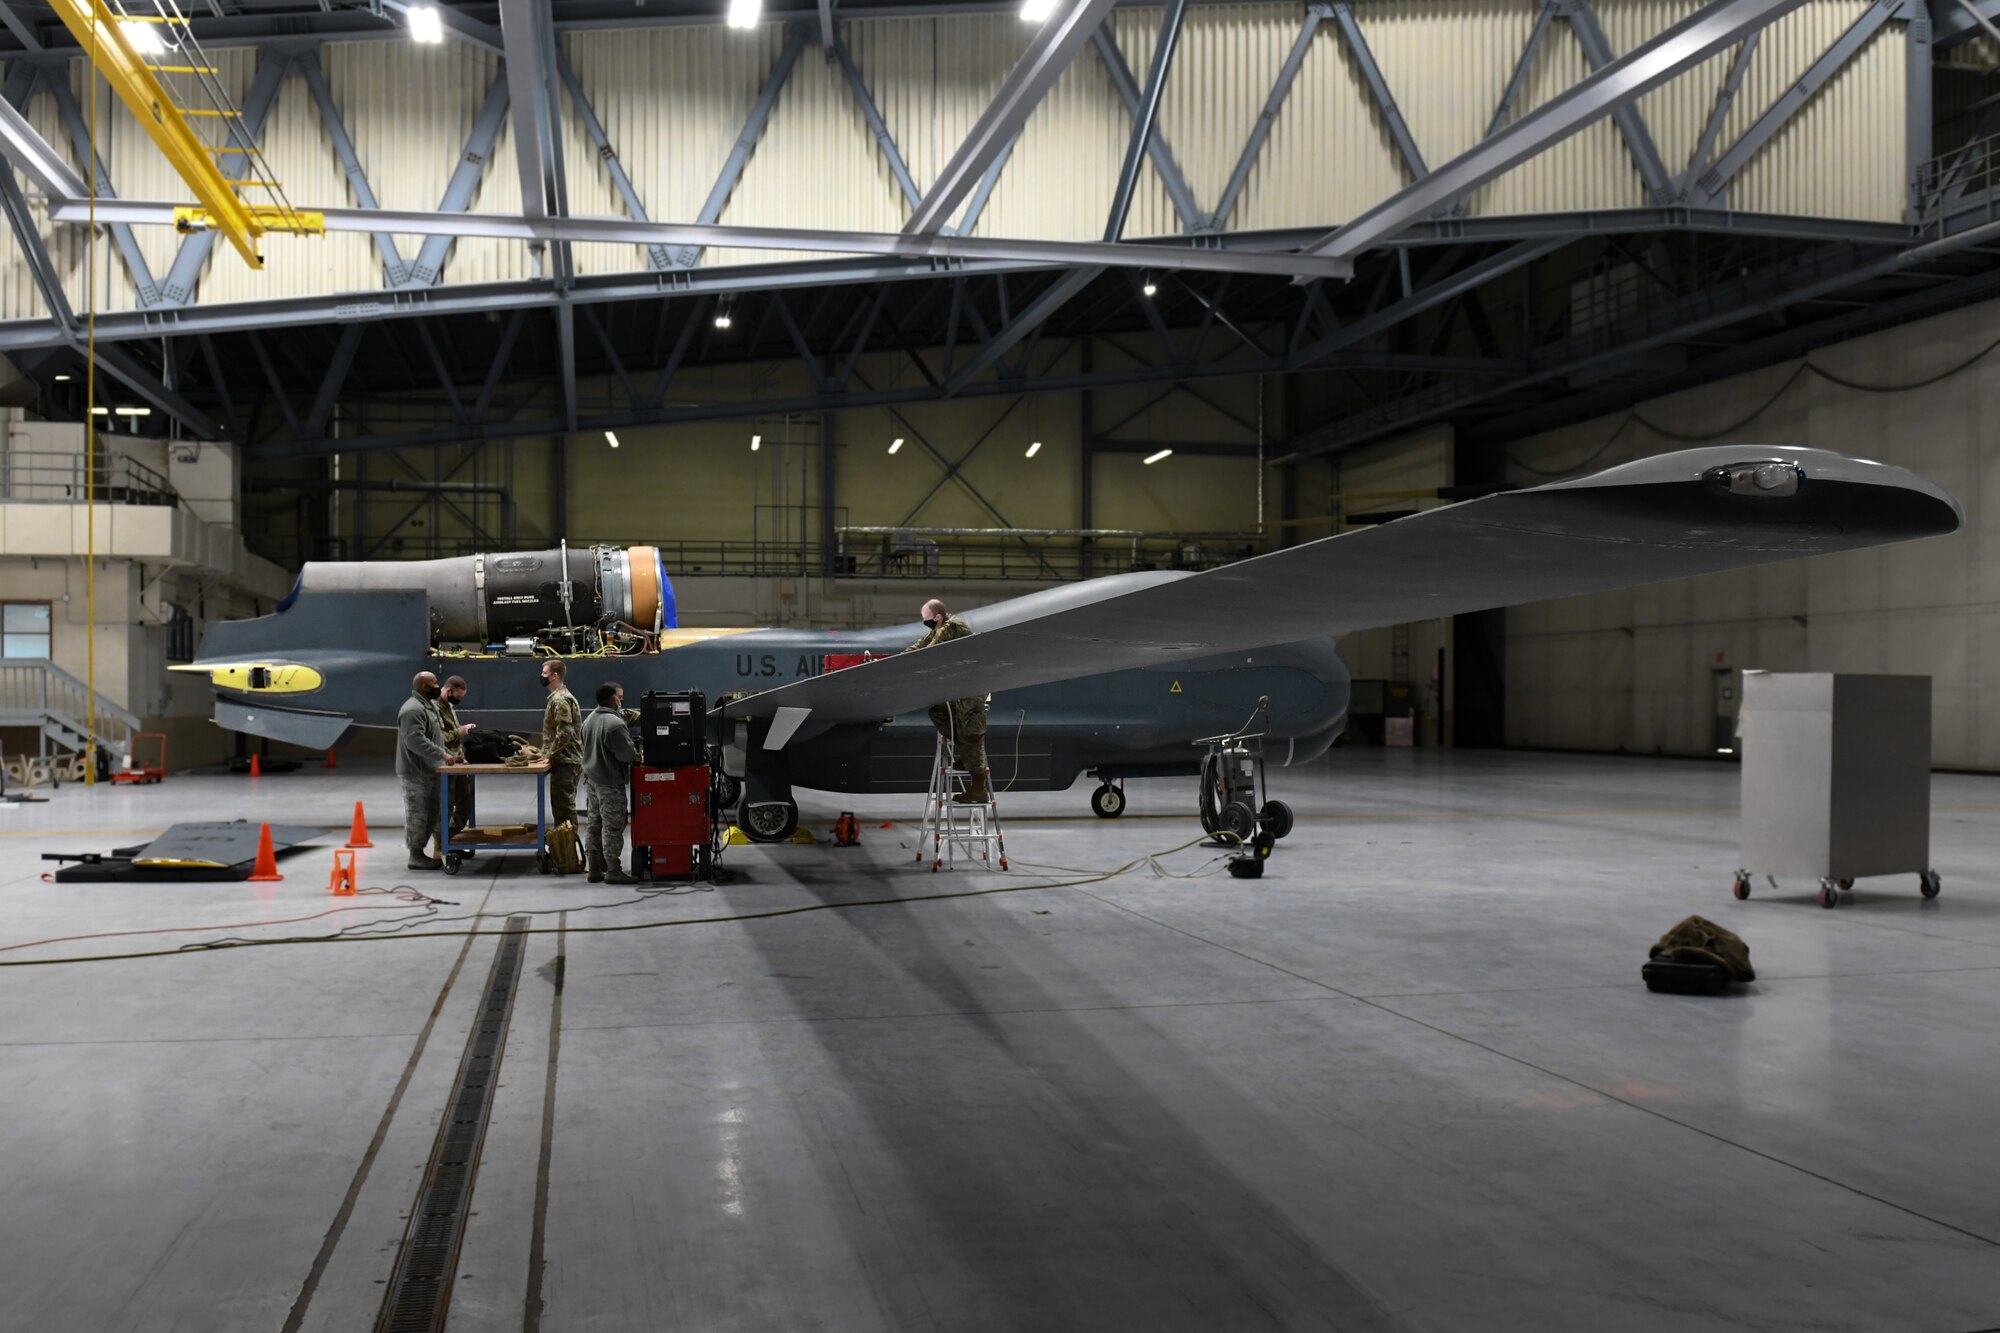 Airmen from the 319th Aircraft Maintenance Squadron nondestructive inspection team work together to complete a mobile automated scan on the wing composite of an RQ-4 Global Hawk at Grand Forks Air Force Base, N.D., March 25, 2021. The 319 AMXS NDI team is the first and only team to travel across the world to perform MAUS inspections on the Global Hawk. (U.S. Air Force photo by Airman 1st Class Ashley Richards)